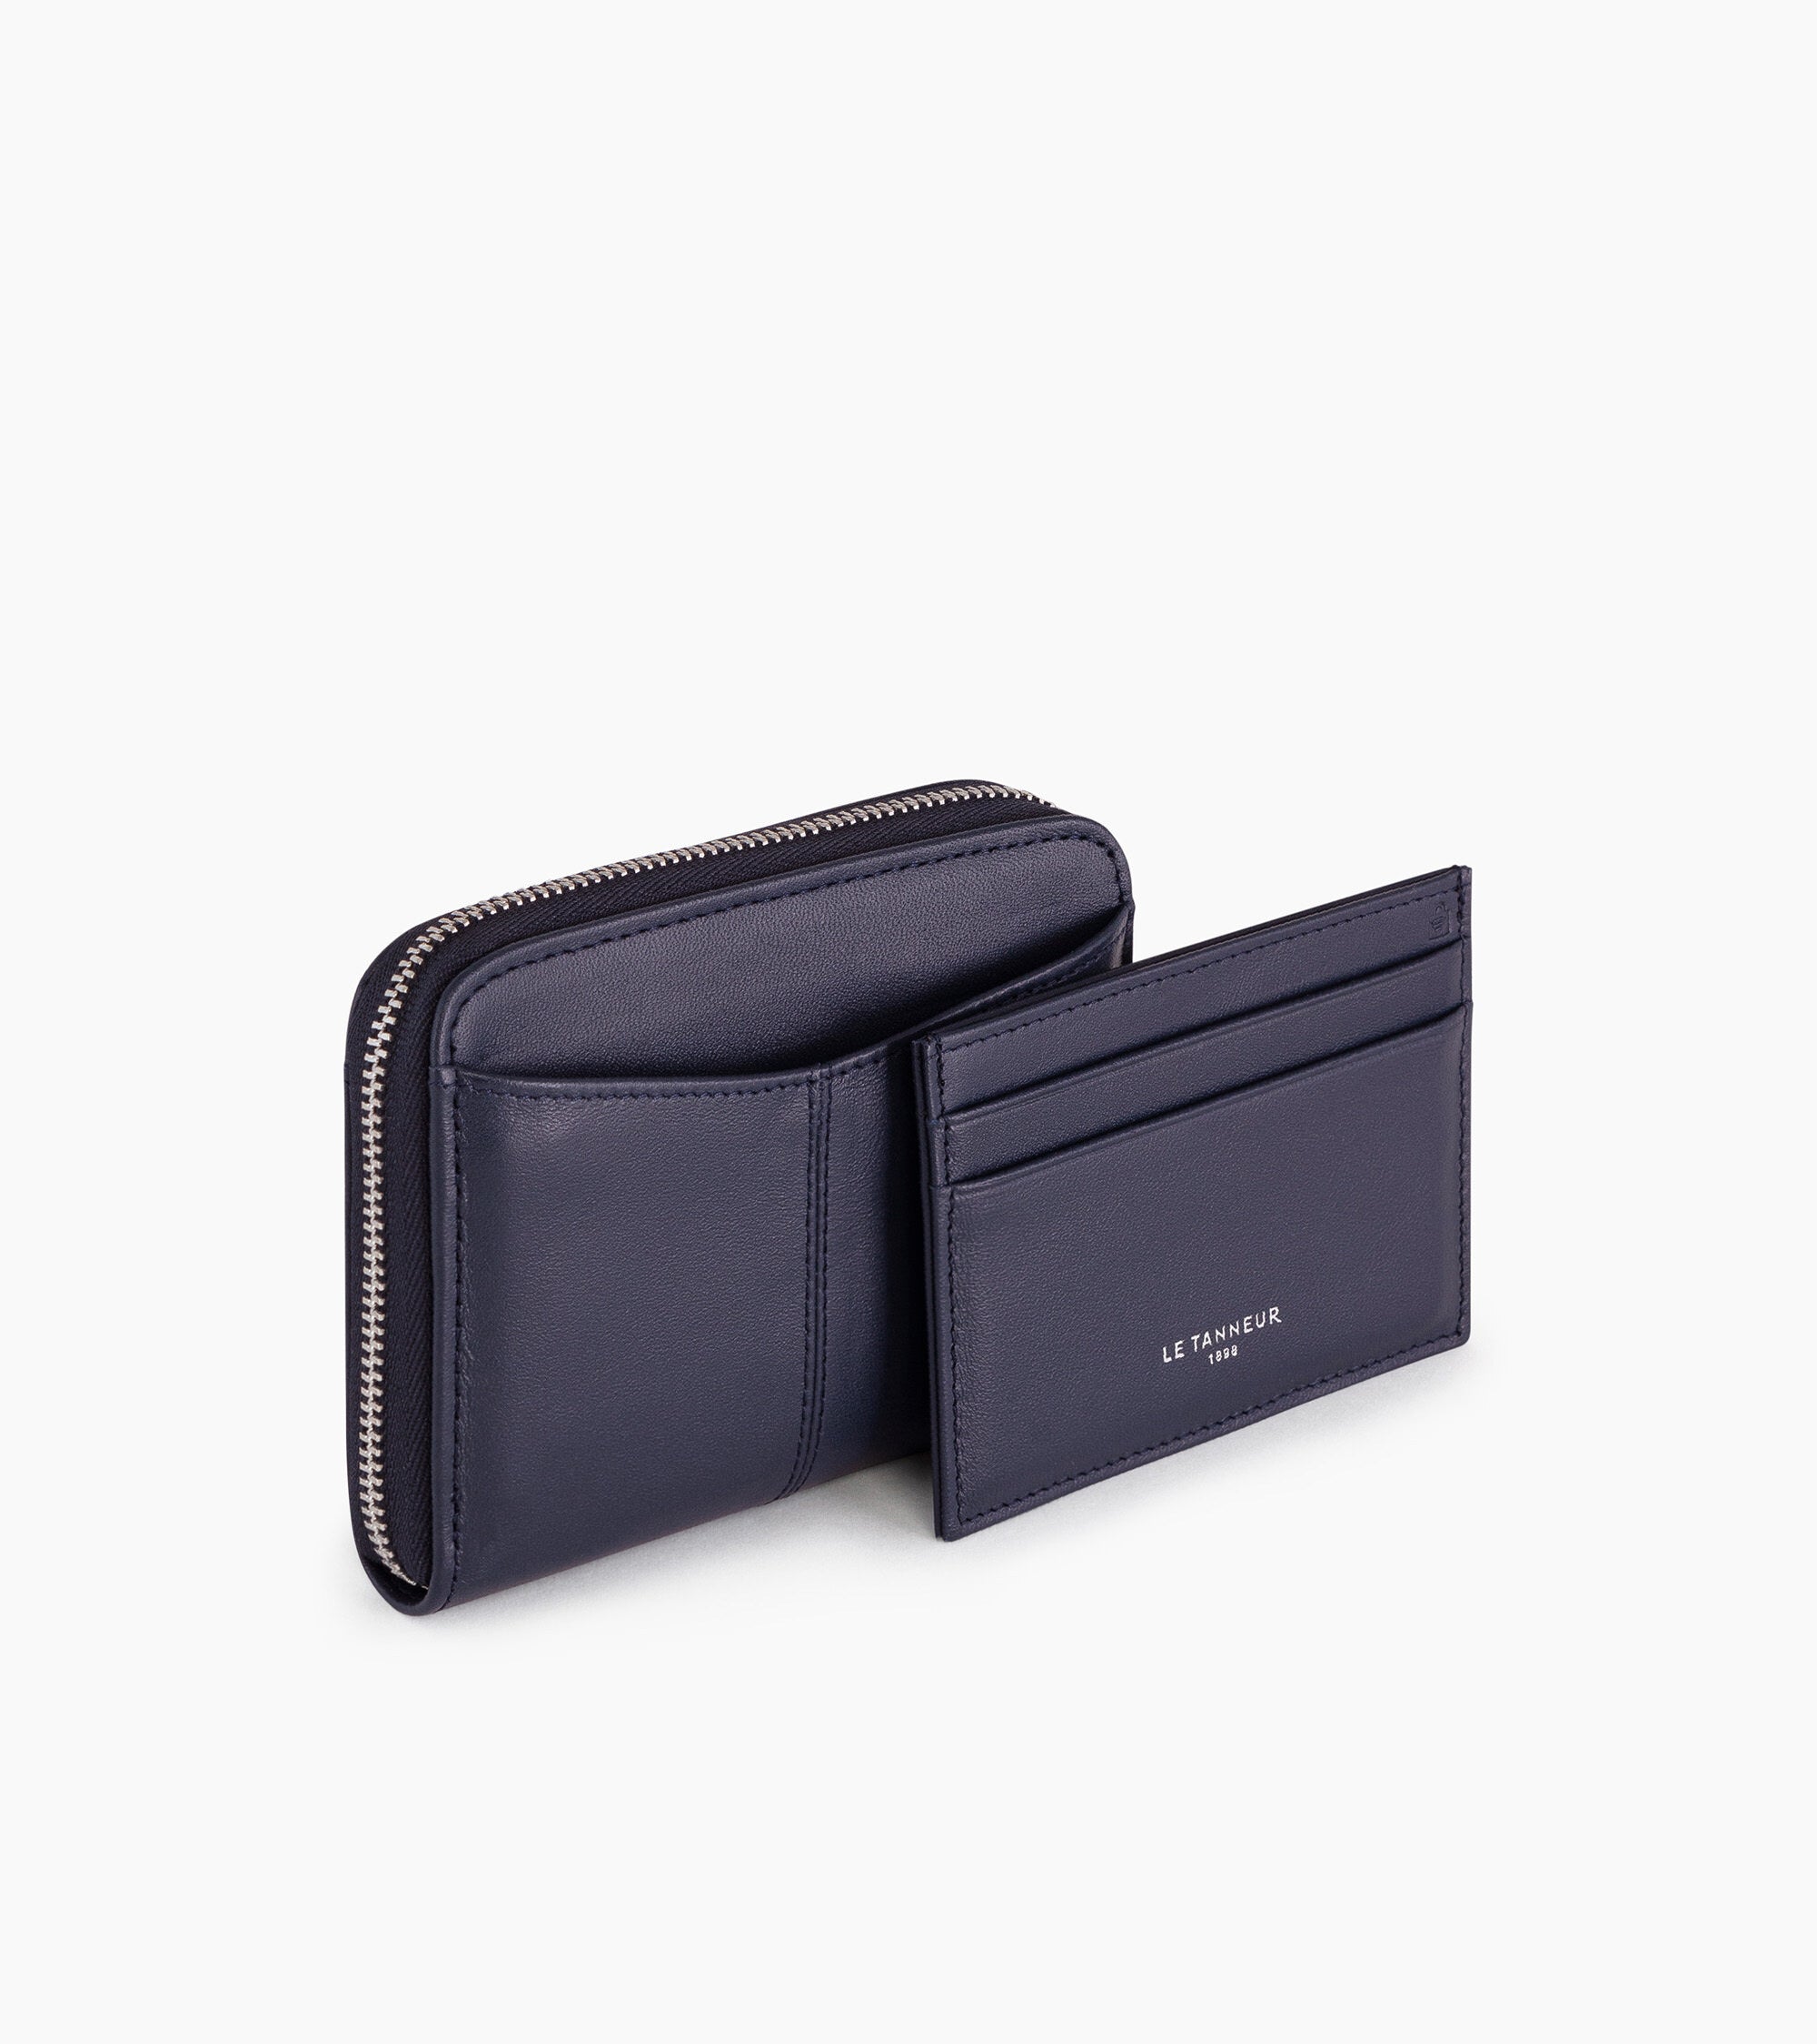 Zipped Charlotte smooth leather coin purse and removable cardholder